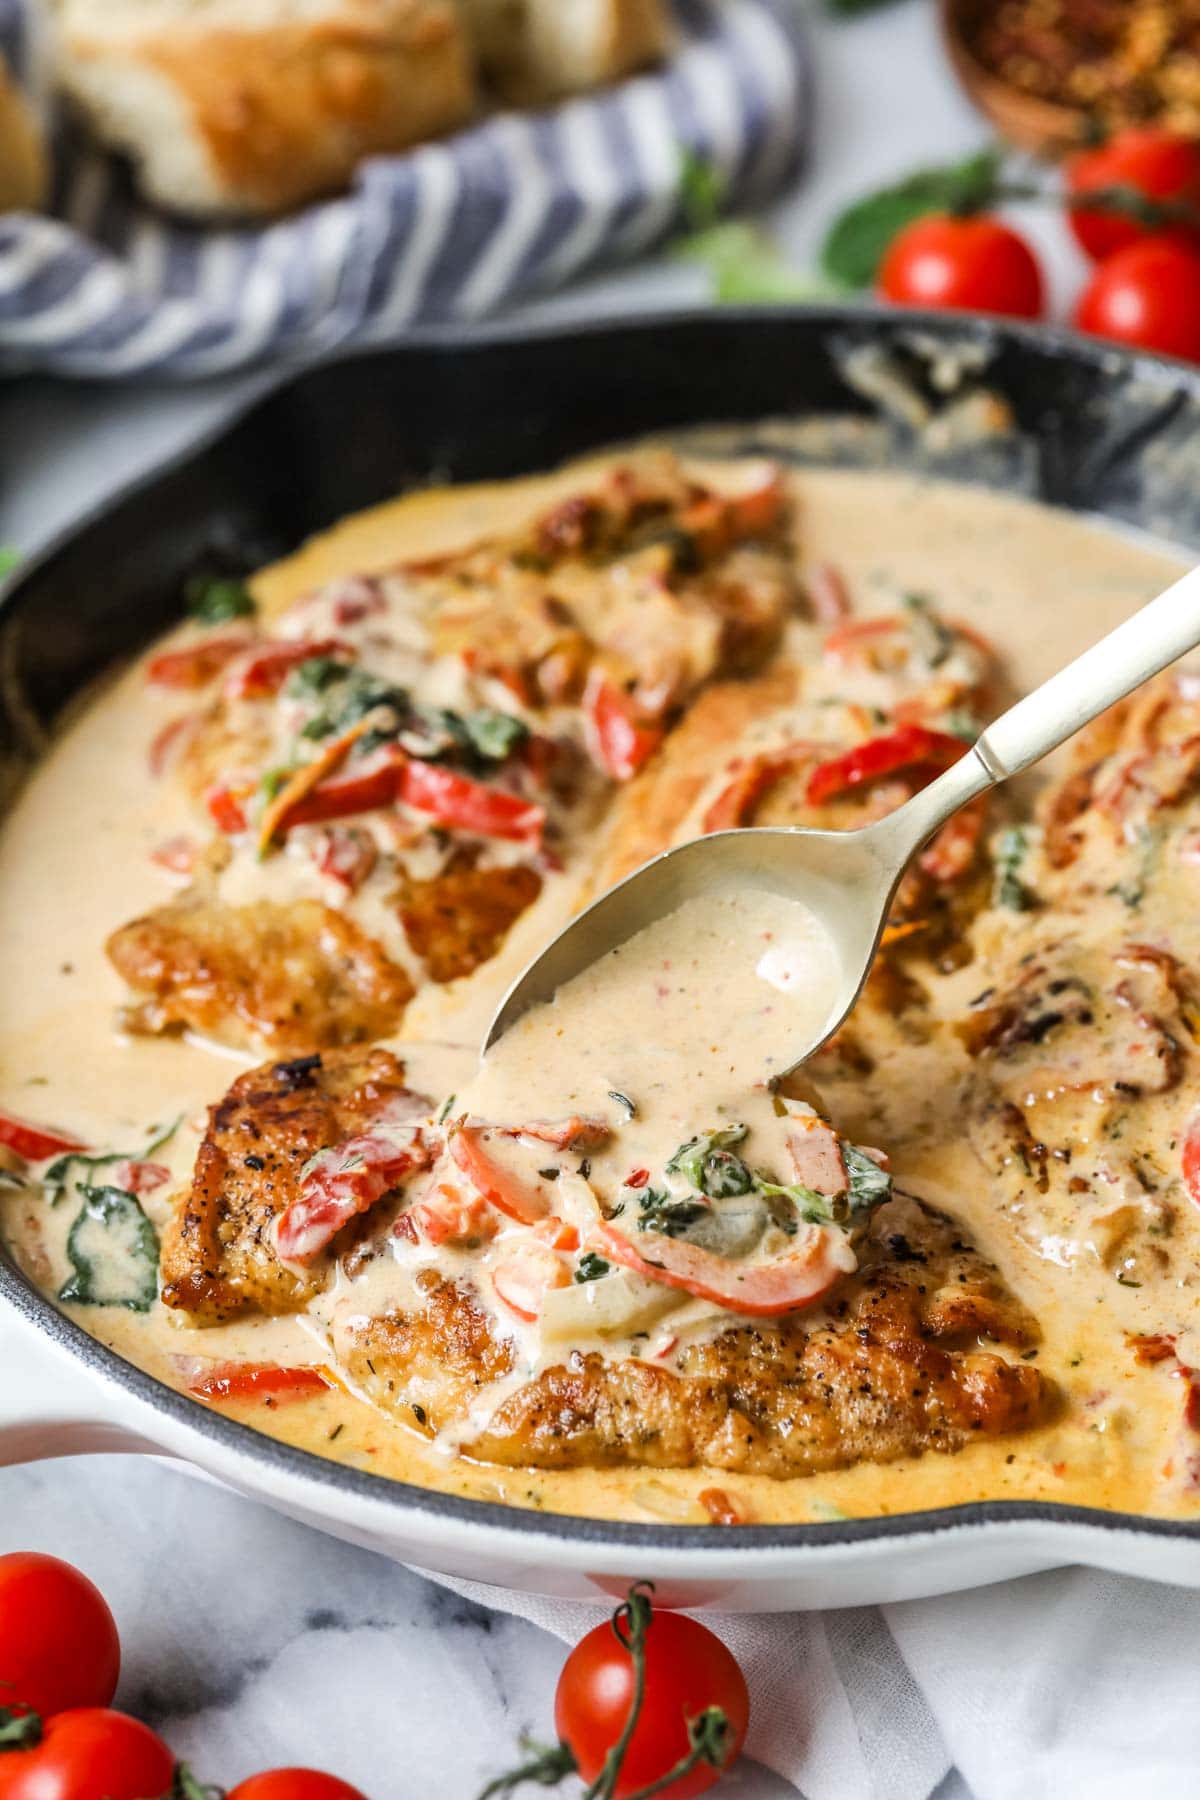 Cream sauce made with red peppers, spinach, and sun dried tomatoes being spooned over seared chicken.